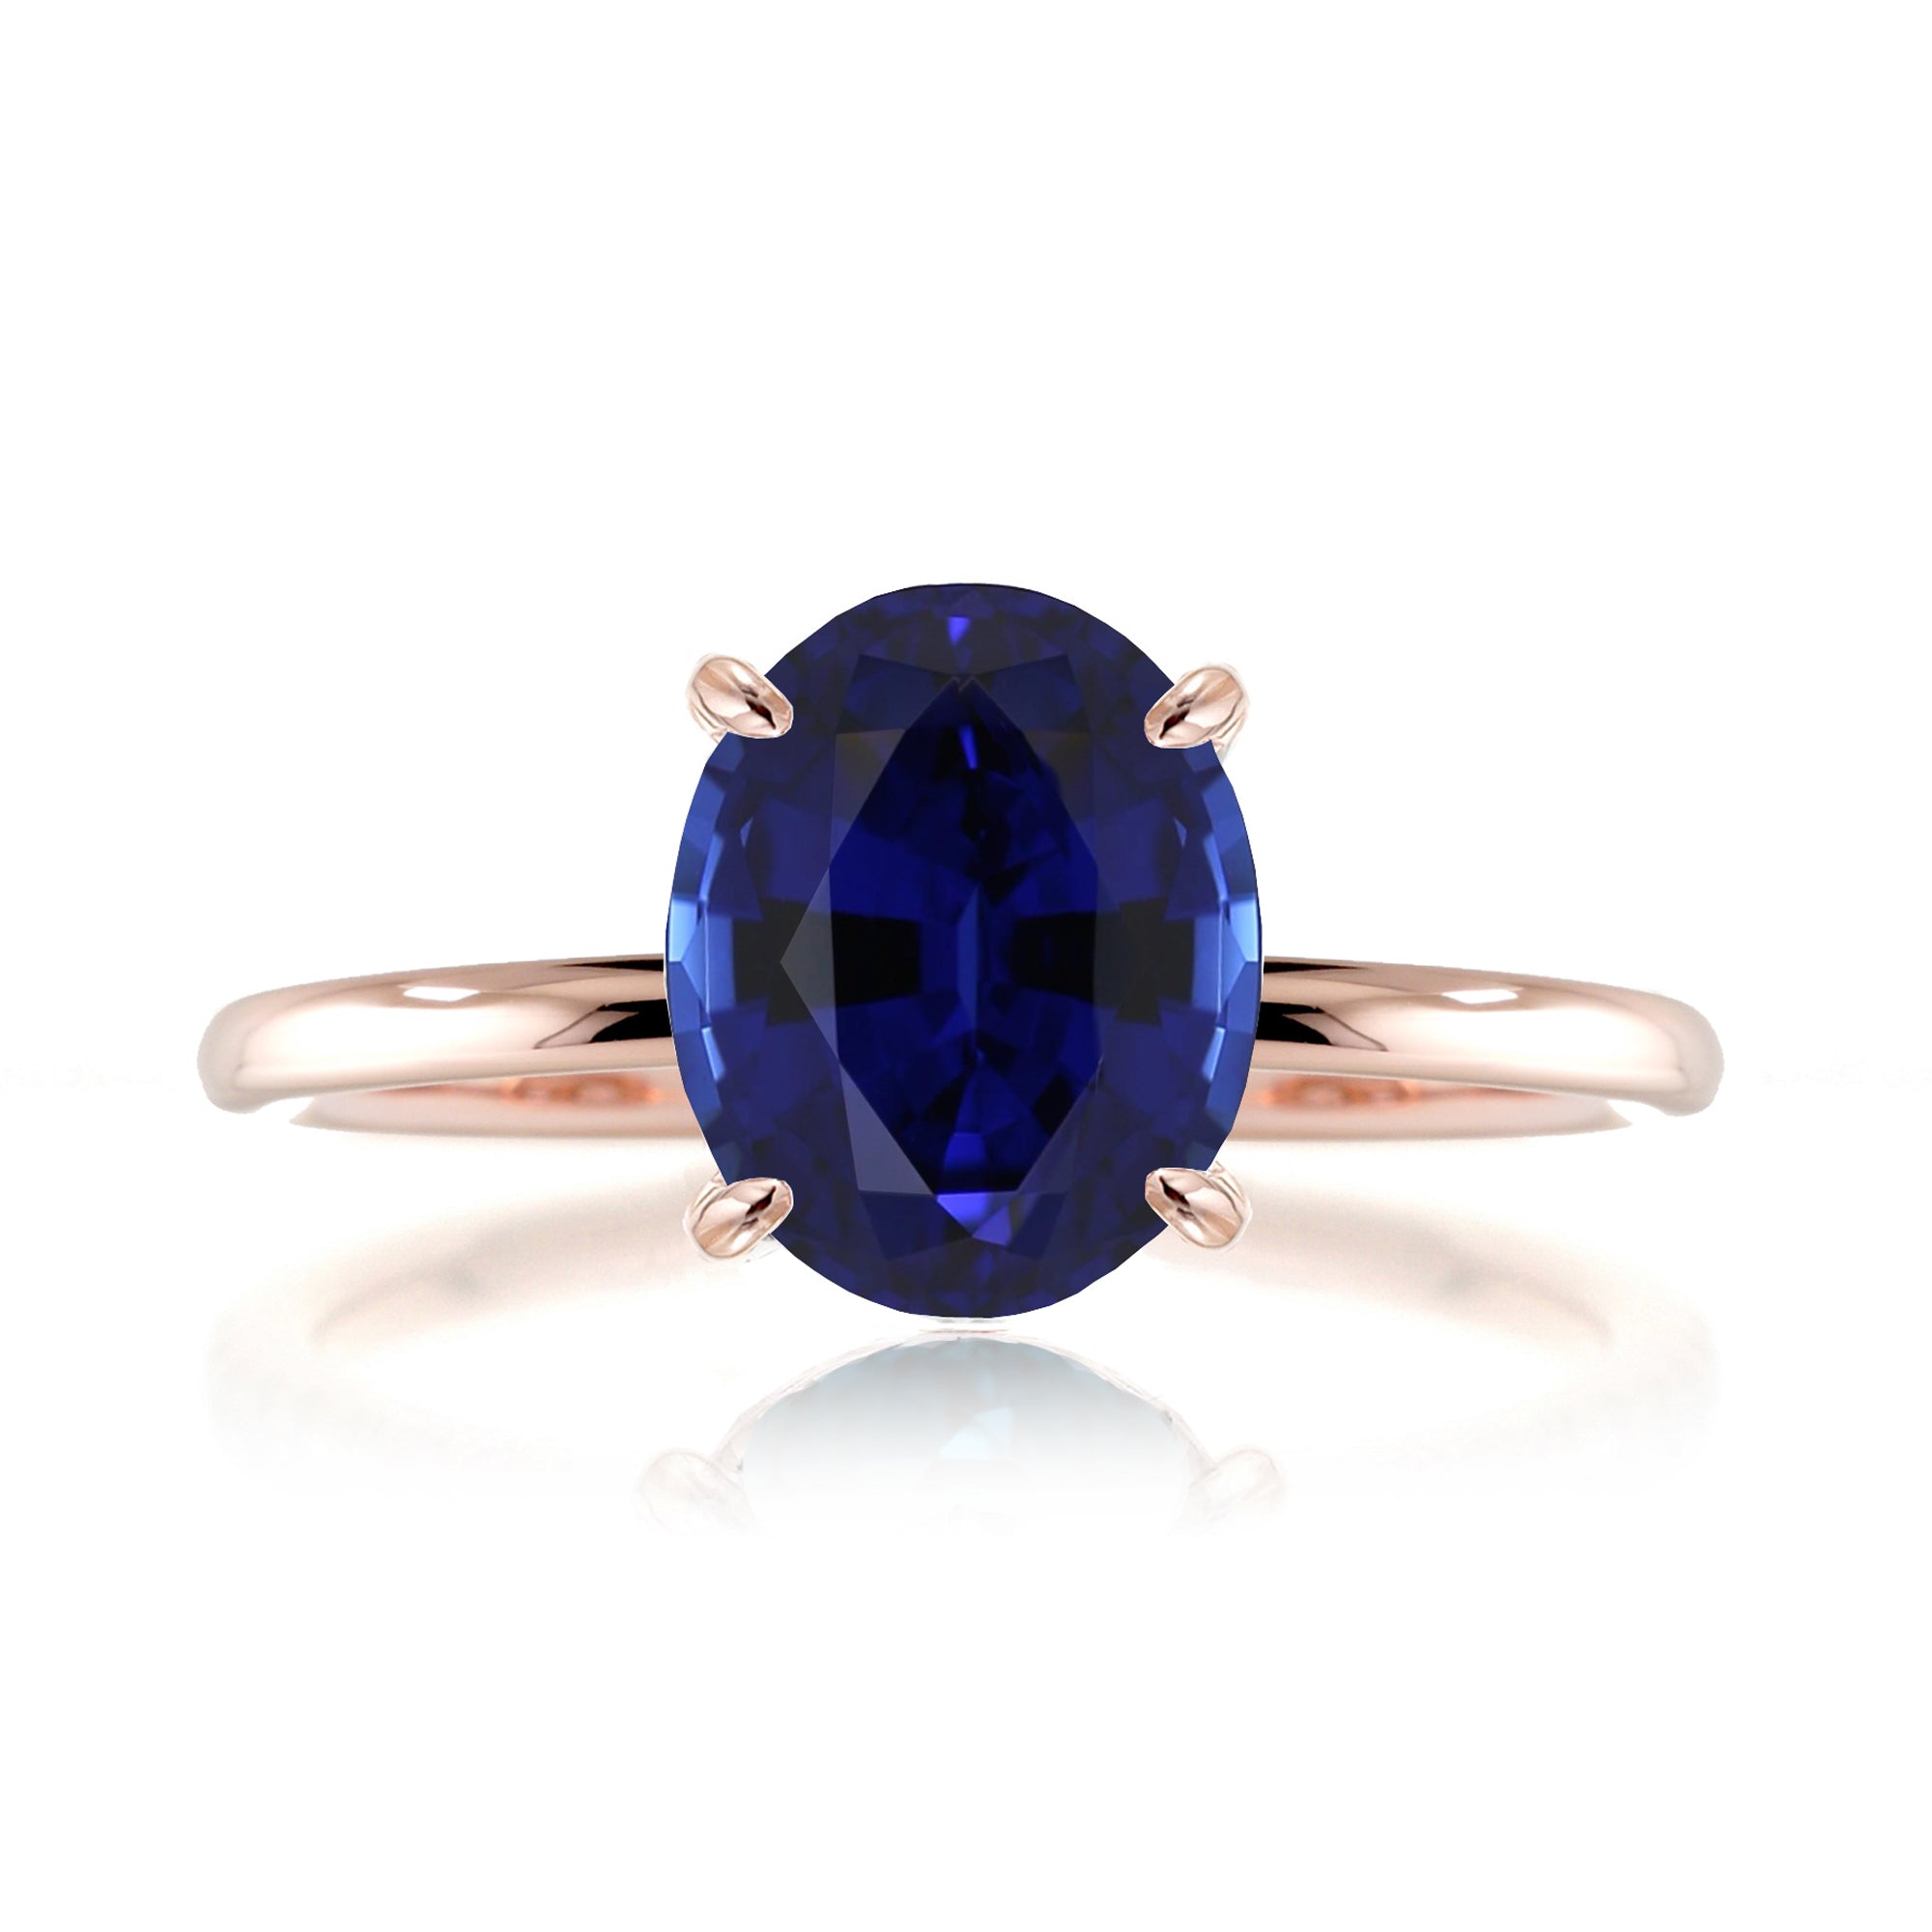 Oval blue sapphire solid band engagement ring rose gold - the Ava